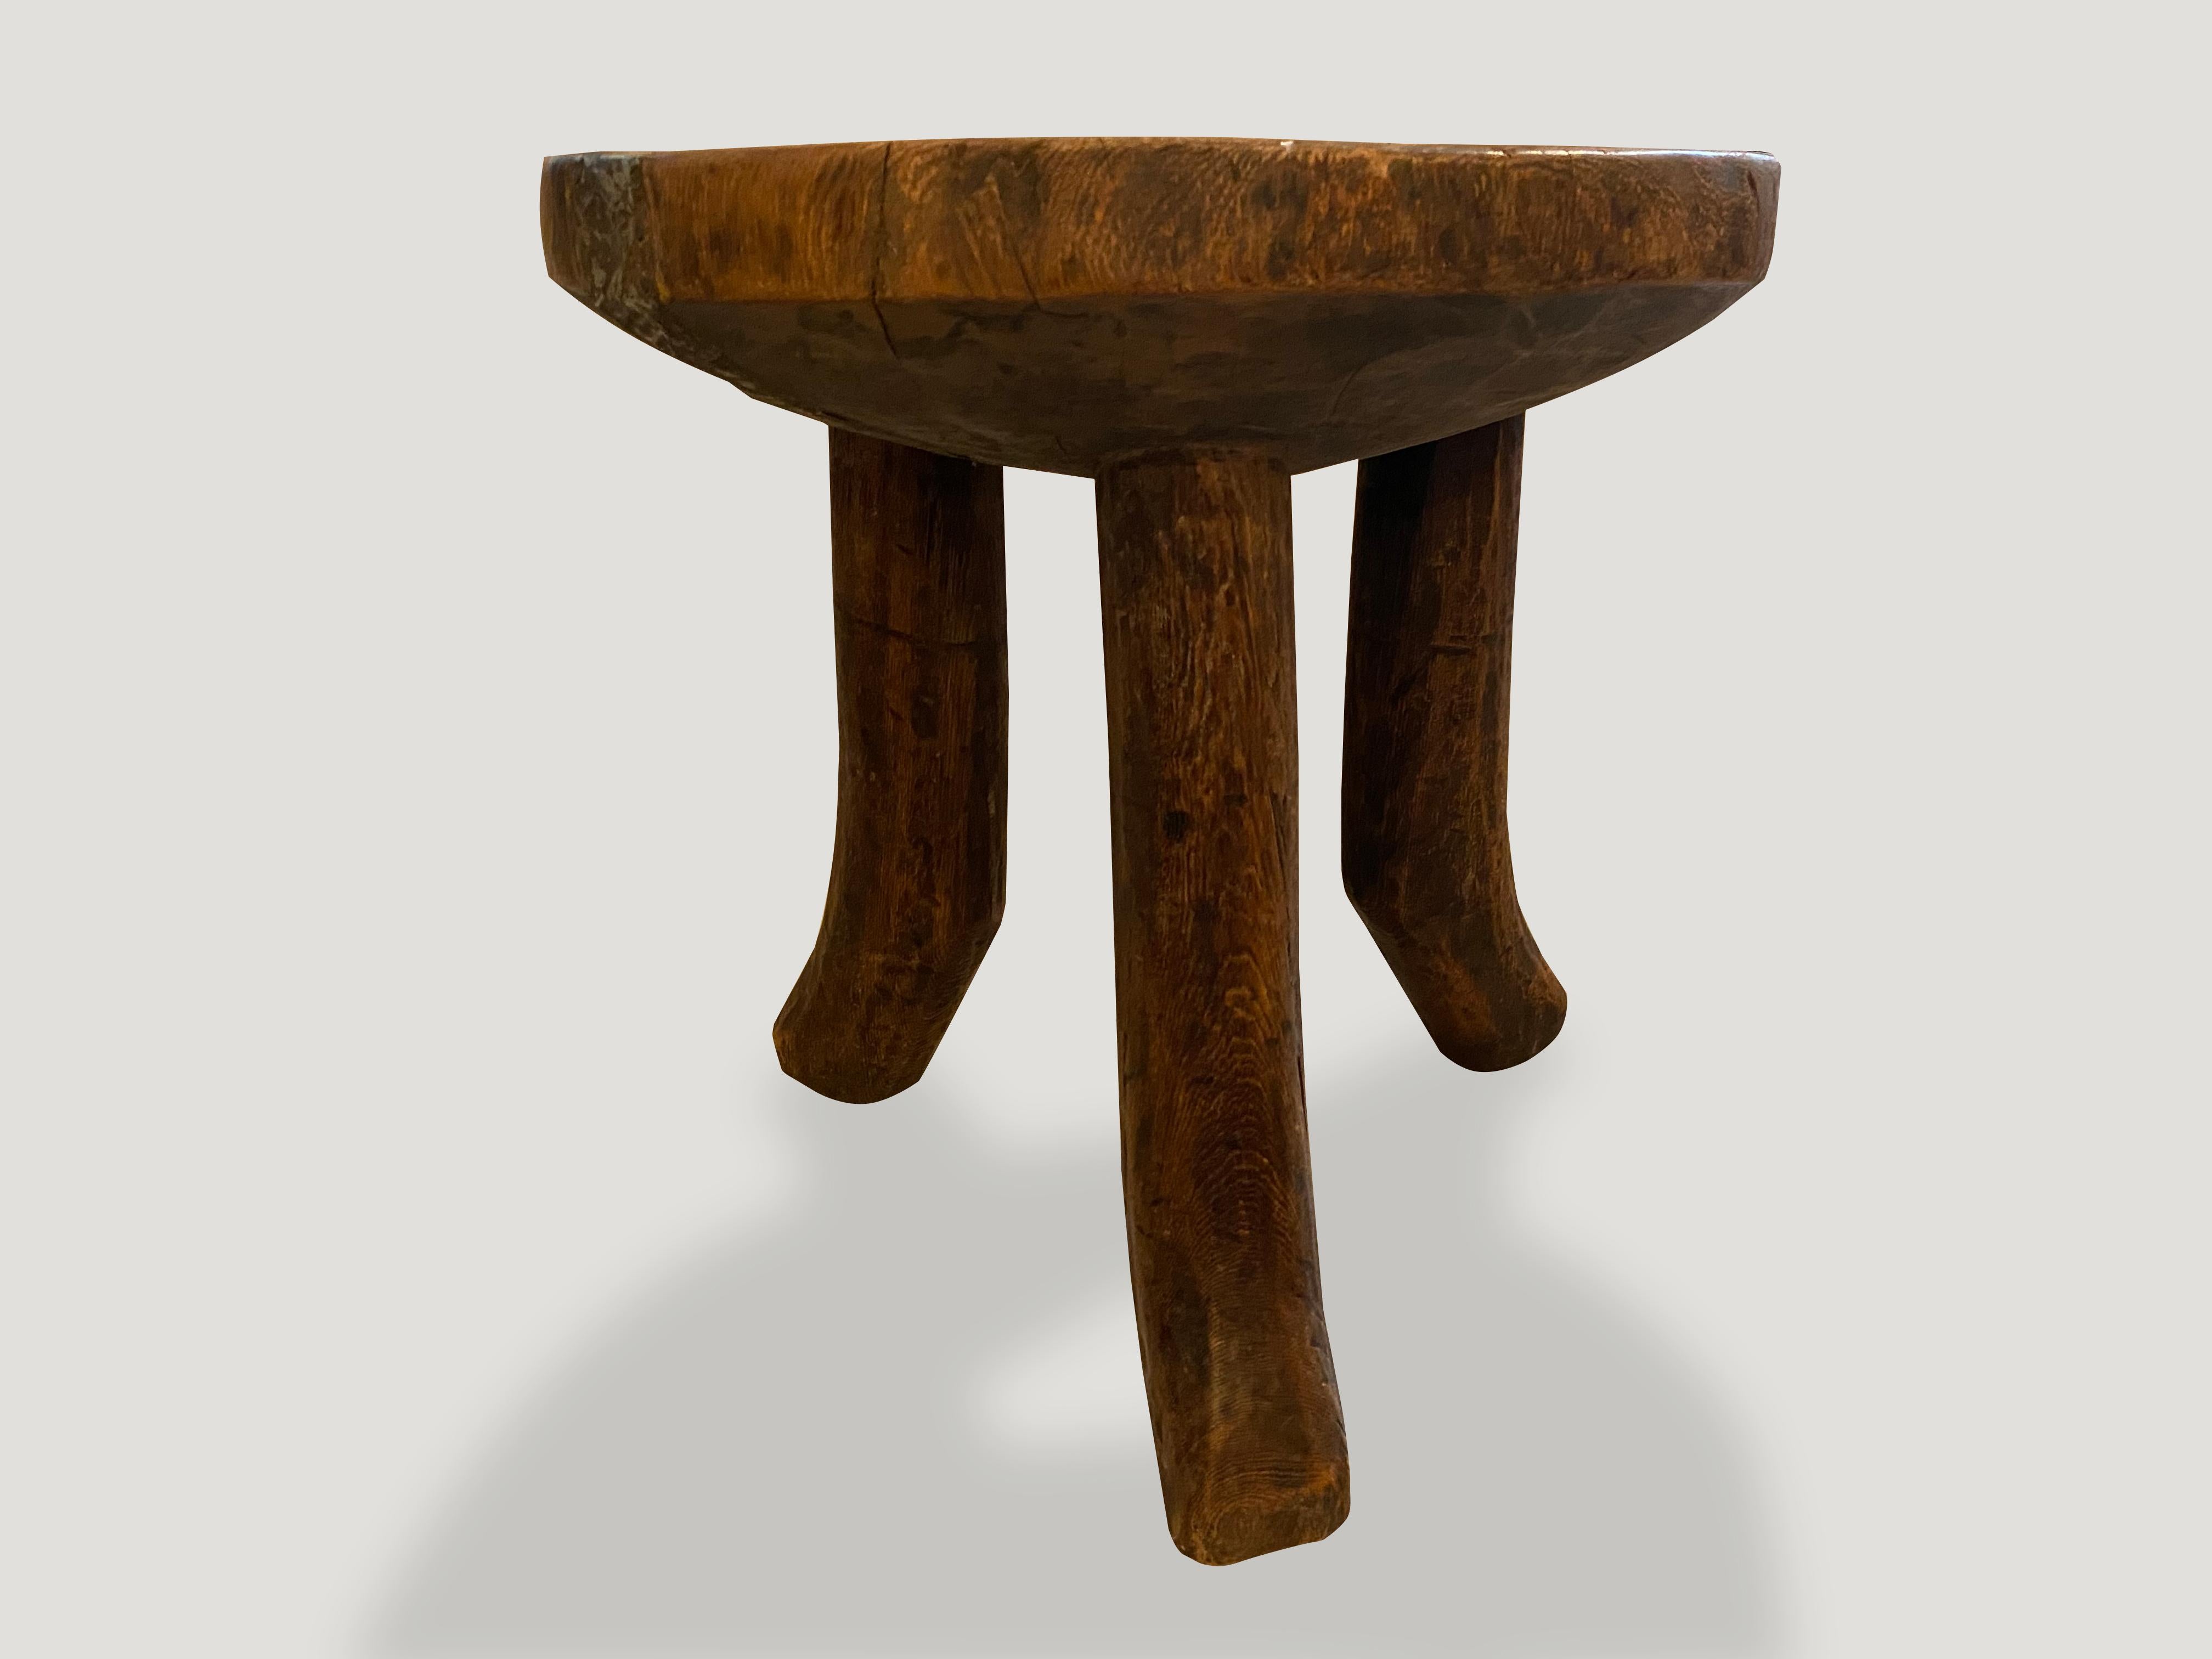 Impressive antique African mahogany side table or bowl, hand carved from a single piece of mahogany wood. Great for placing a book or perhaps towels in a bathroom, magazines etc. A beautiful, versatile item that is both sculptural and usable.